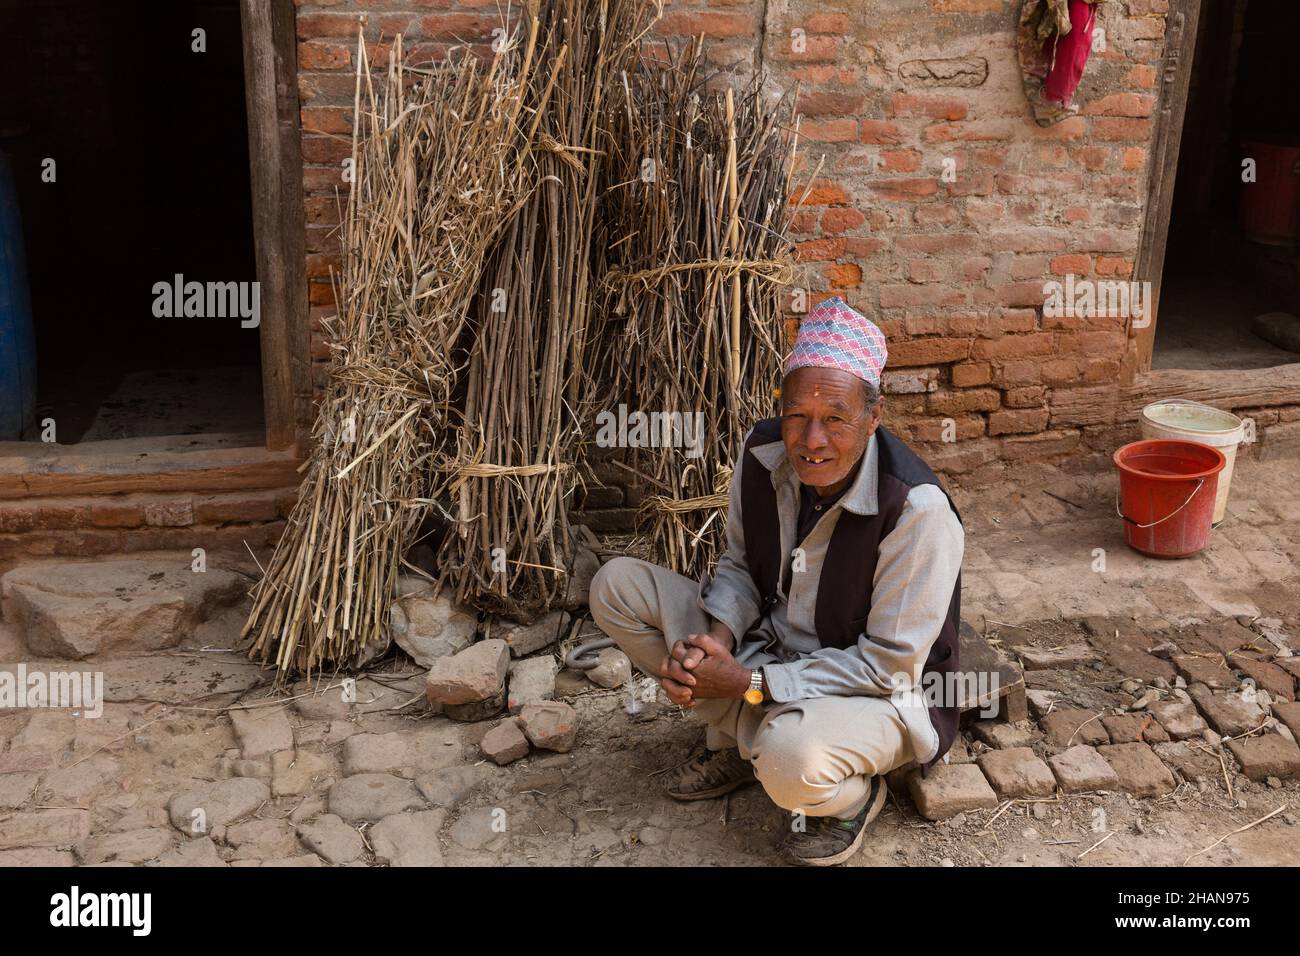 A Nepali man in a dhaka topi hat in front of his house in the medieval Newari village of Khokana in the Kathmandu Valley of Nepal. Stock Photo